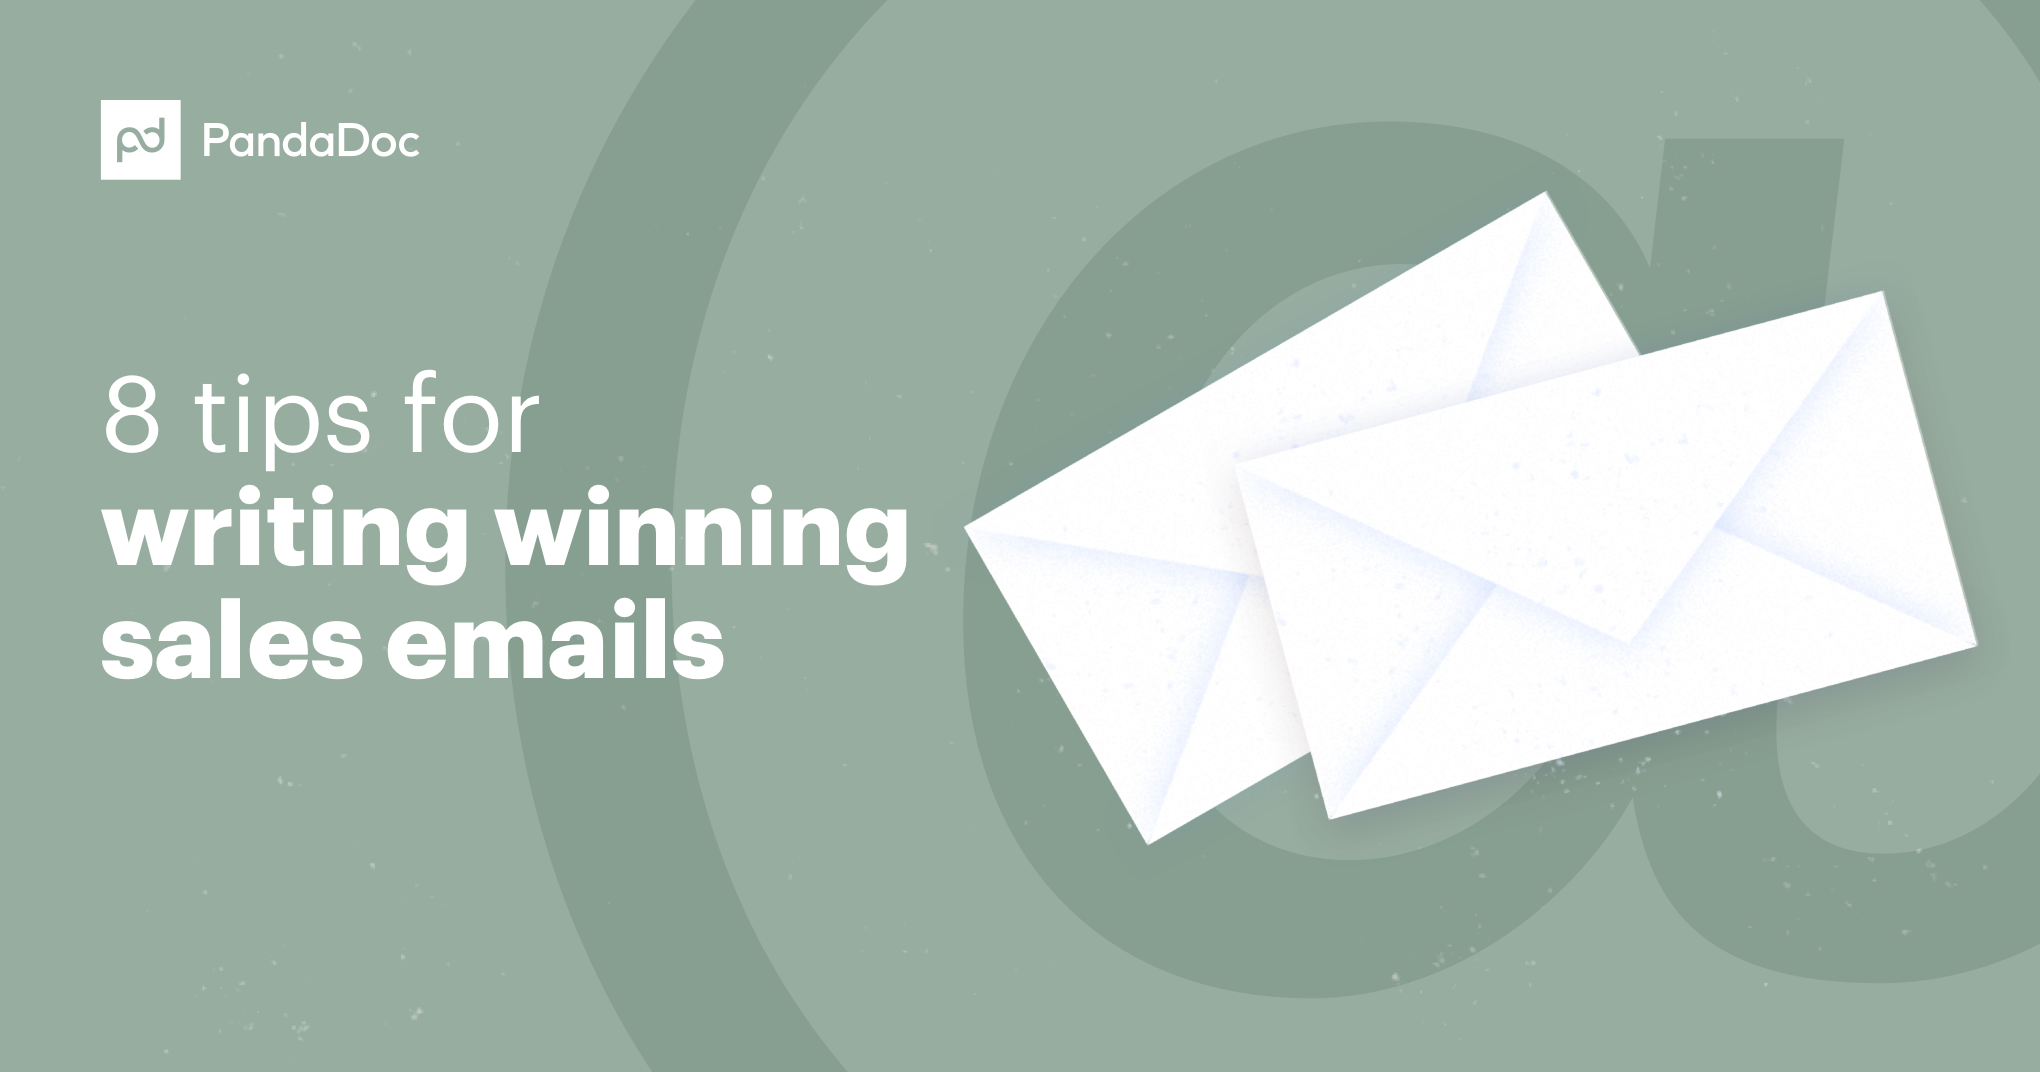 How to write winning sales emails